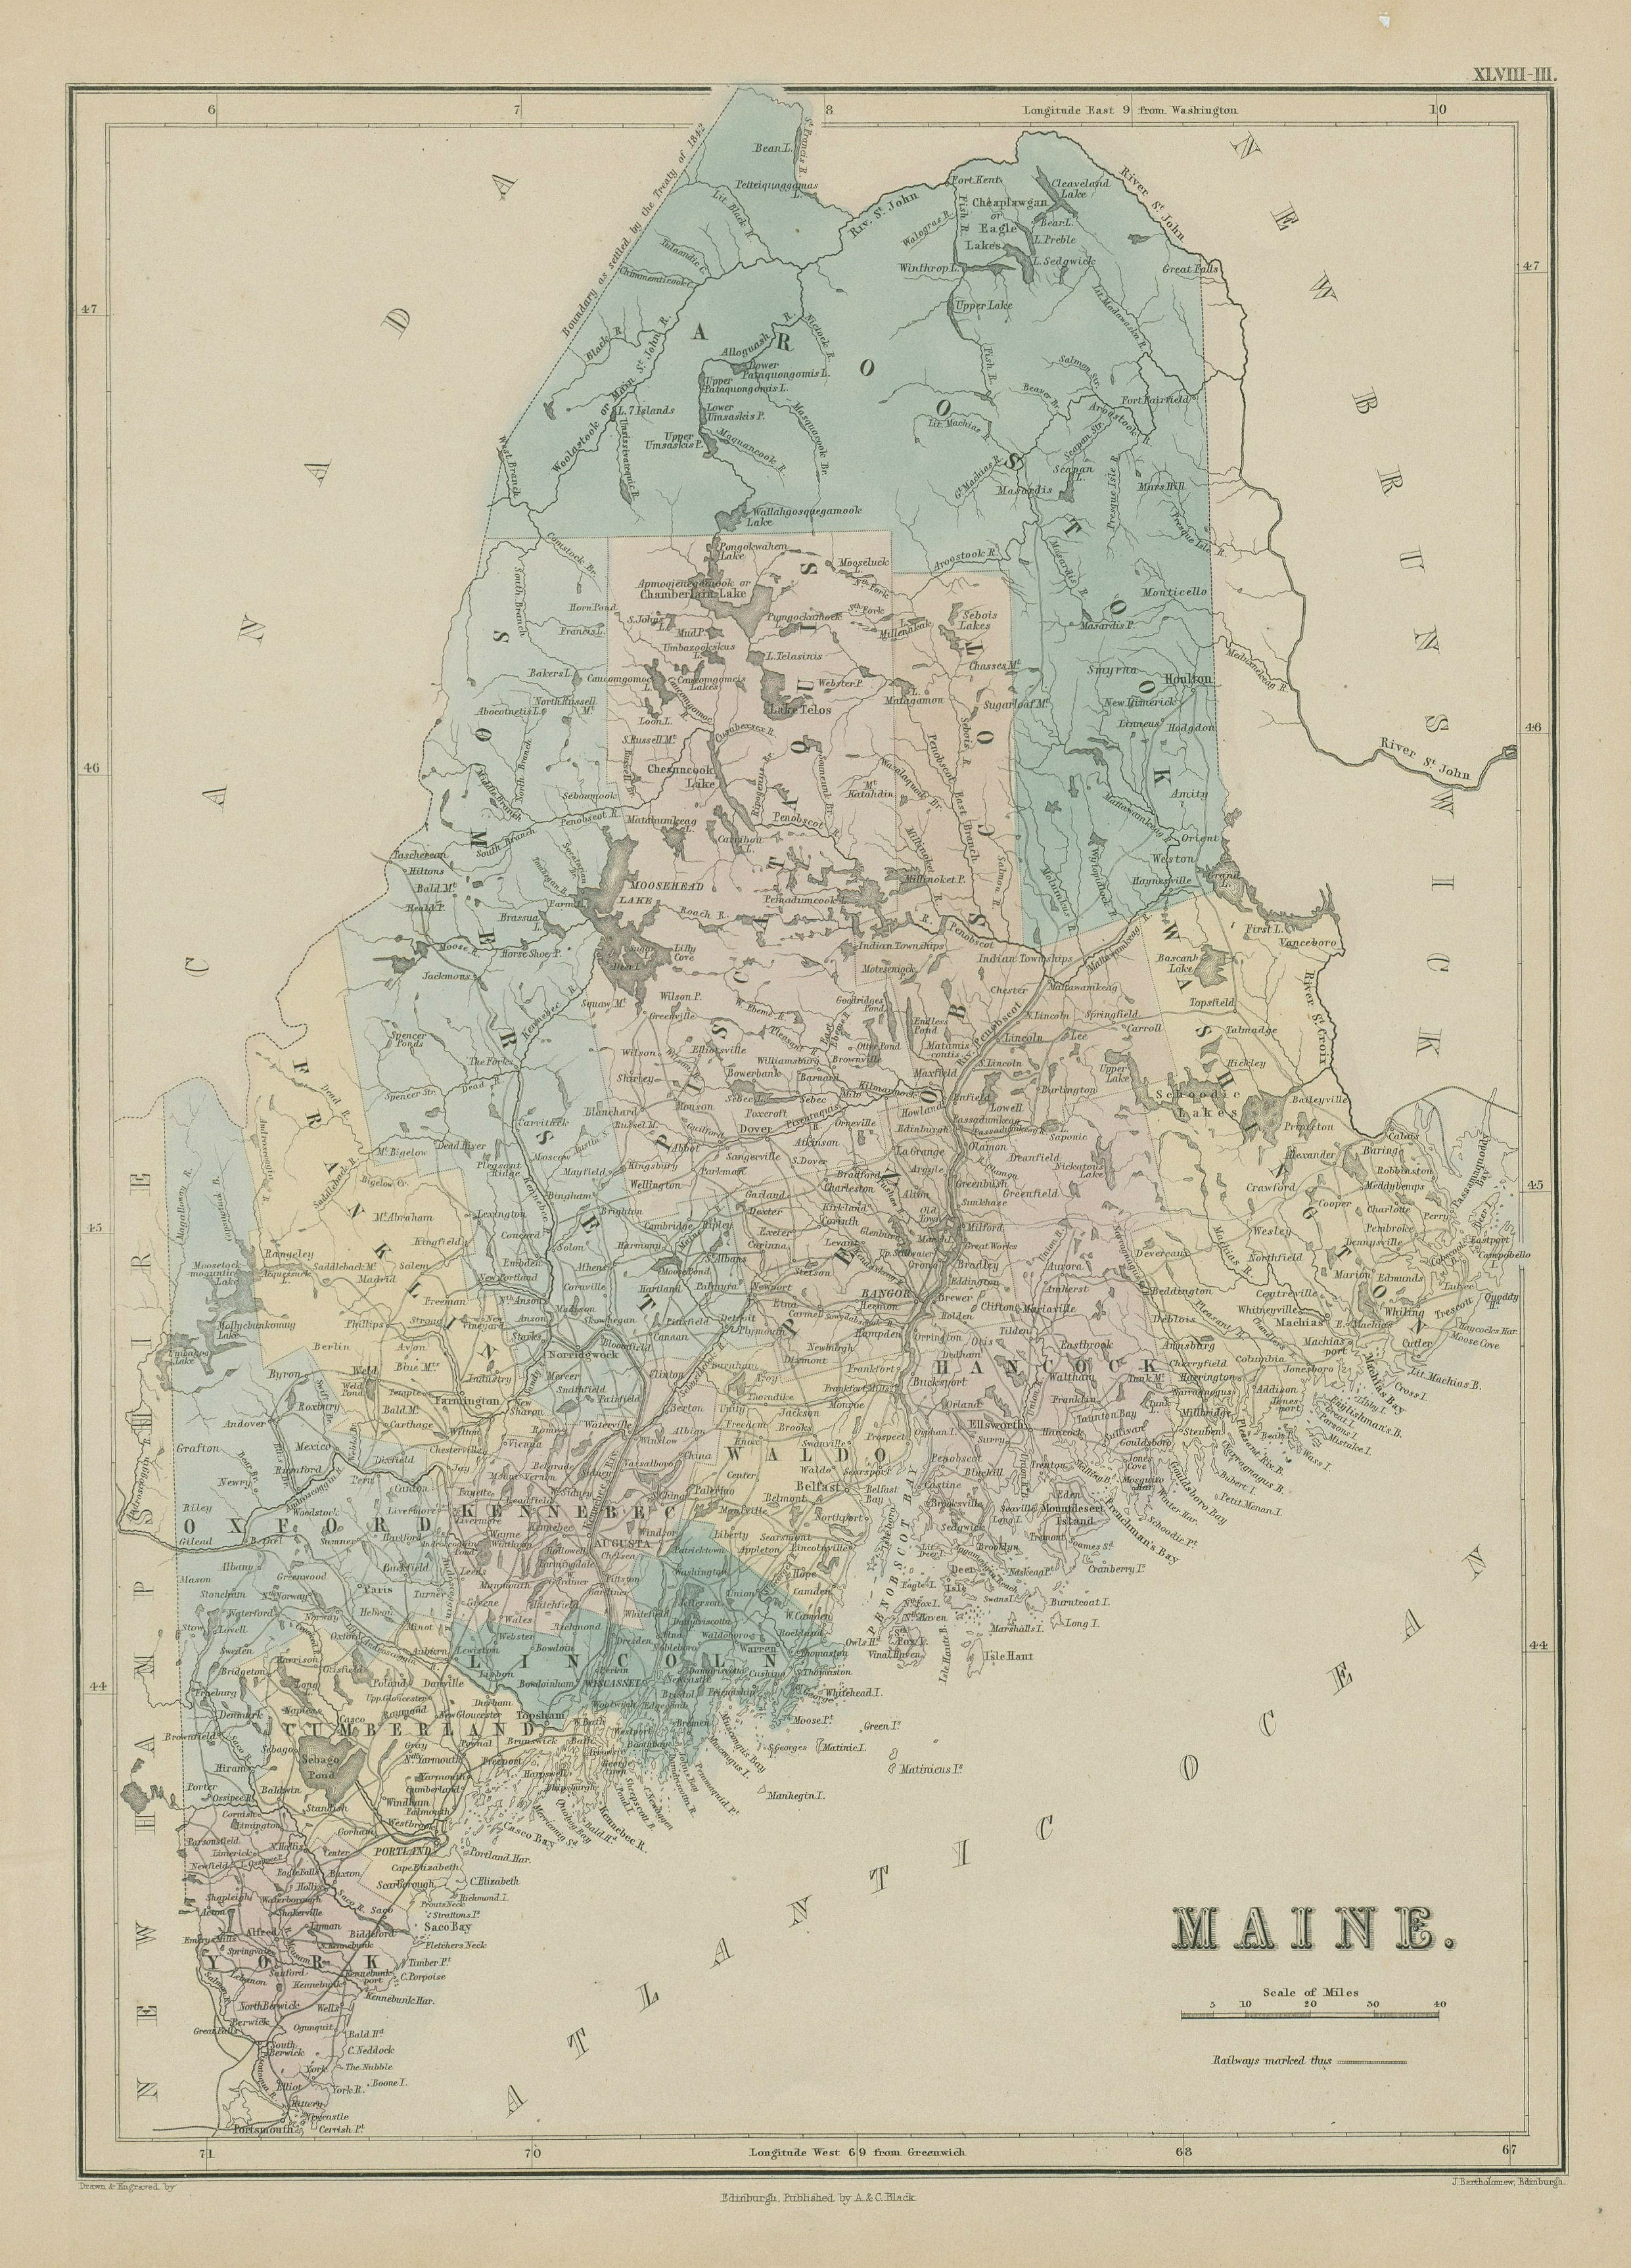 Maine state map showing counties. JOHN BARTHOLOMEW 1856 old antique chart